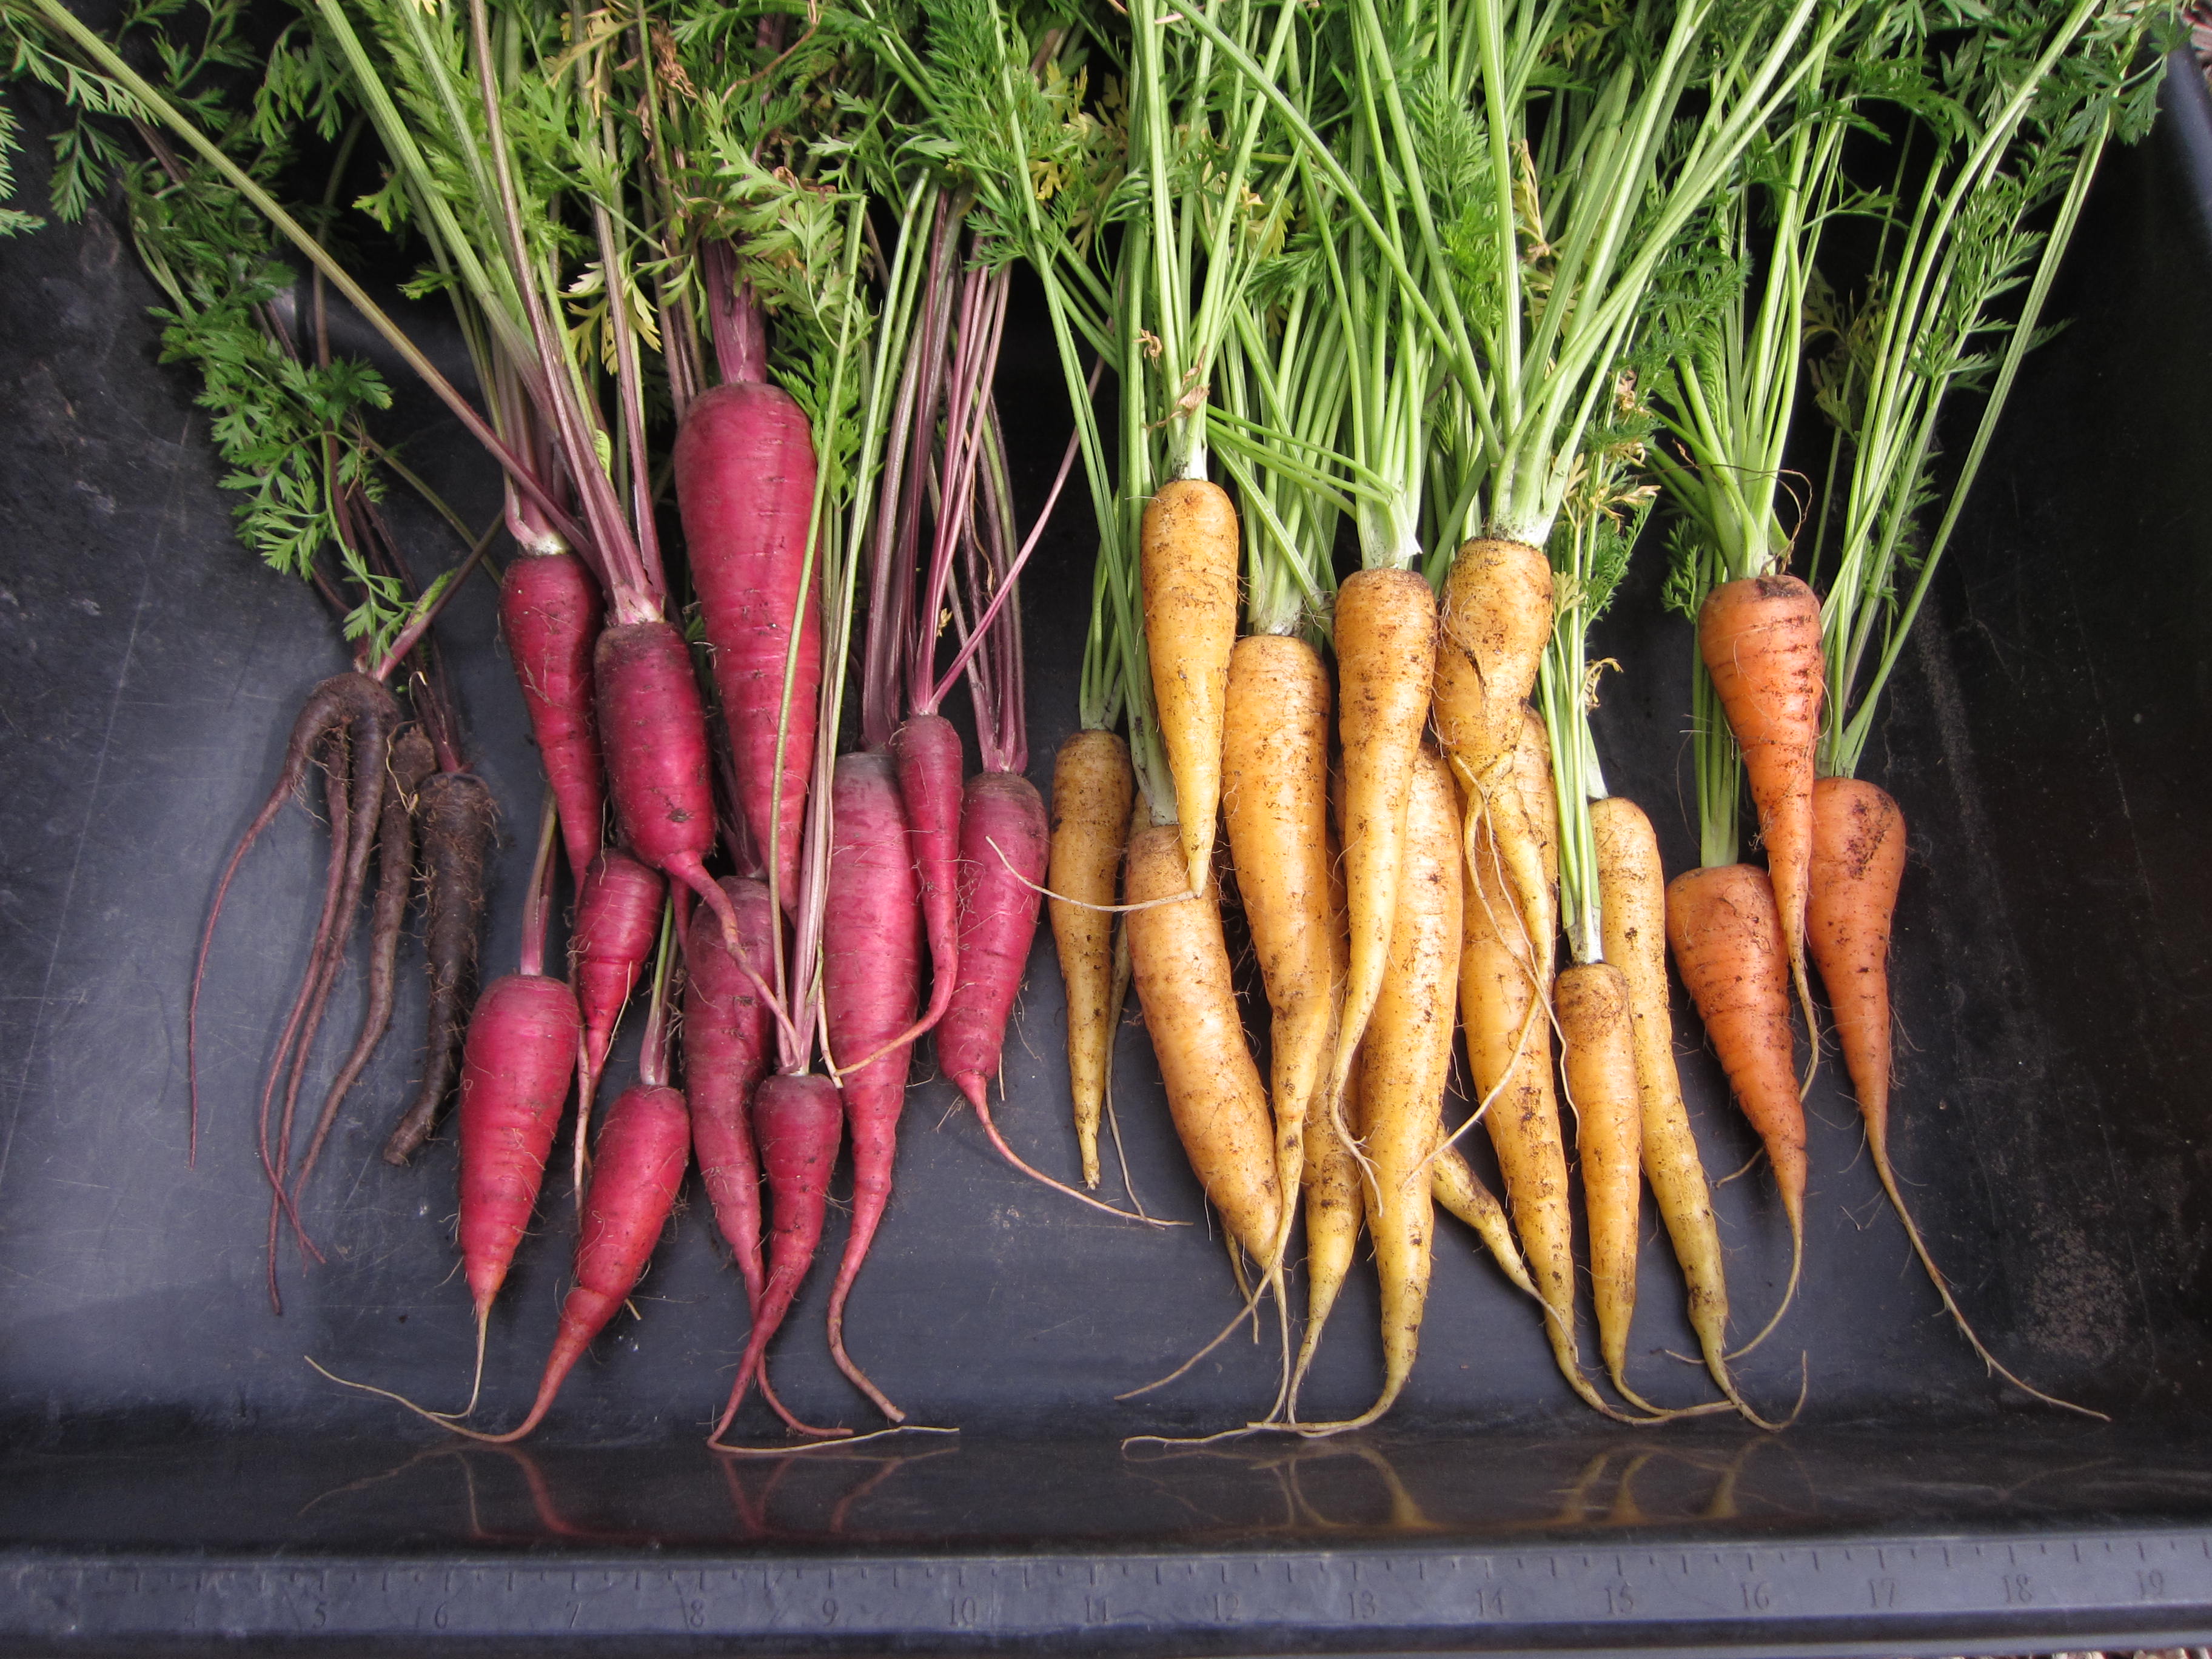 Carrot harvest includes (left to right) Pusa Asita, Cosmic Purple, Yellowstone and Red Core Chantenay.